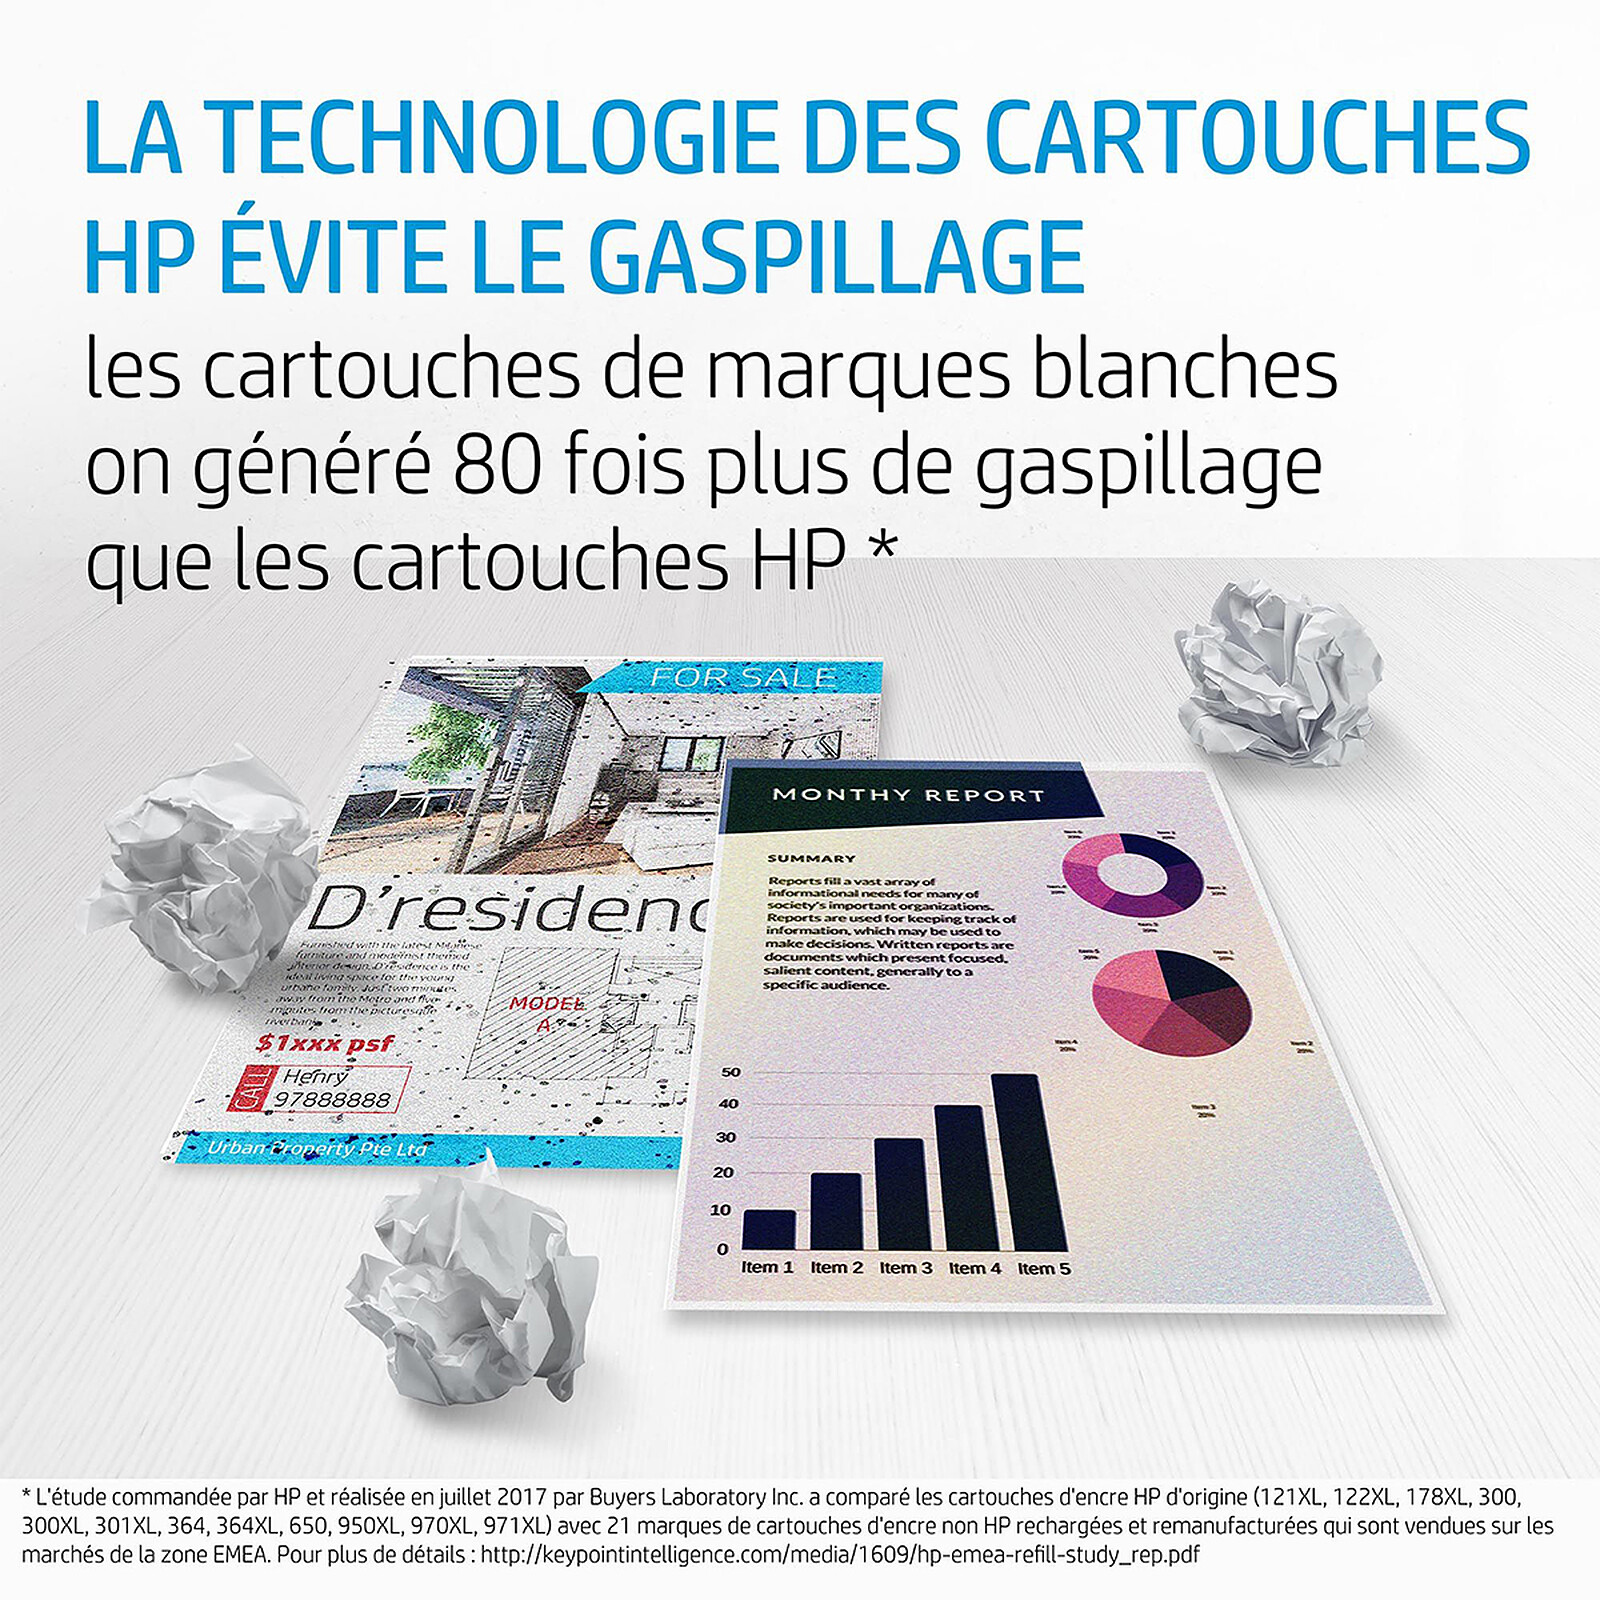 Cartouche HP 953 Noir pour Officejet Pro 8210/ 8218/ 8715/ 8720/ 8730/ 8710/  8725/ 7720/ 7730/ 7740, 1 000 pages ALL WHAT OFFICE NEEDS